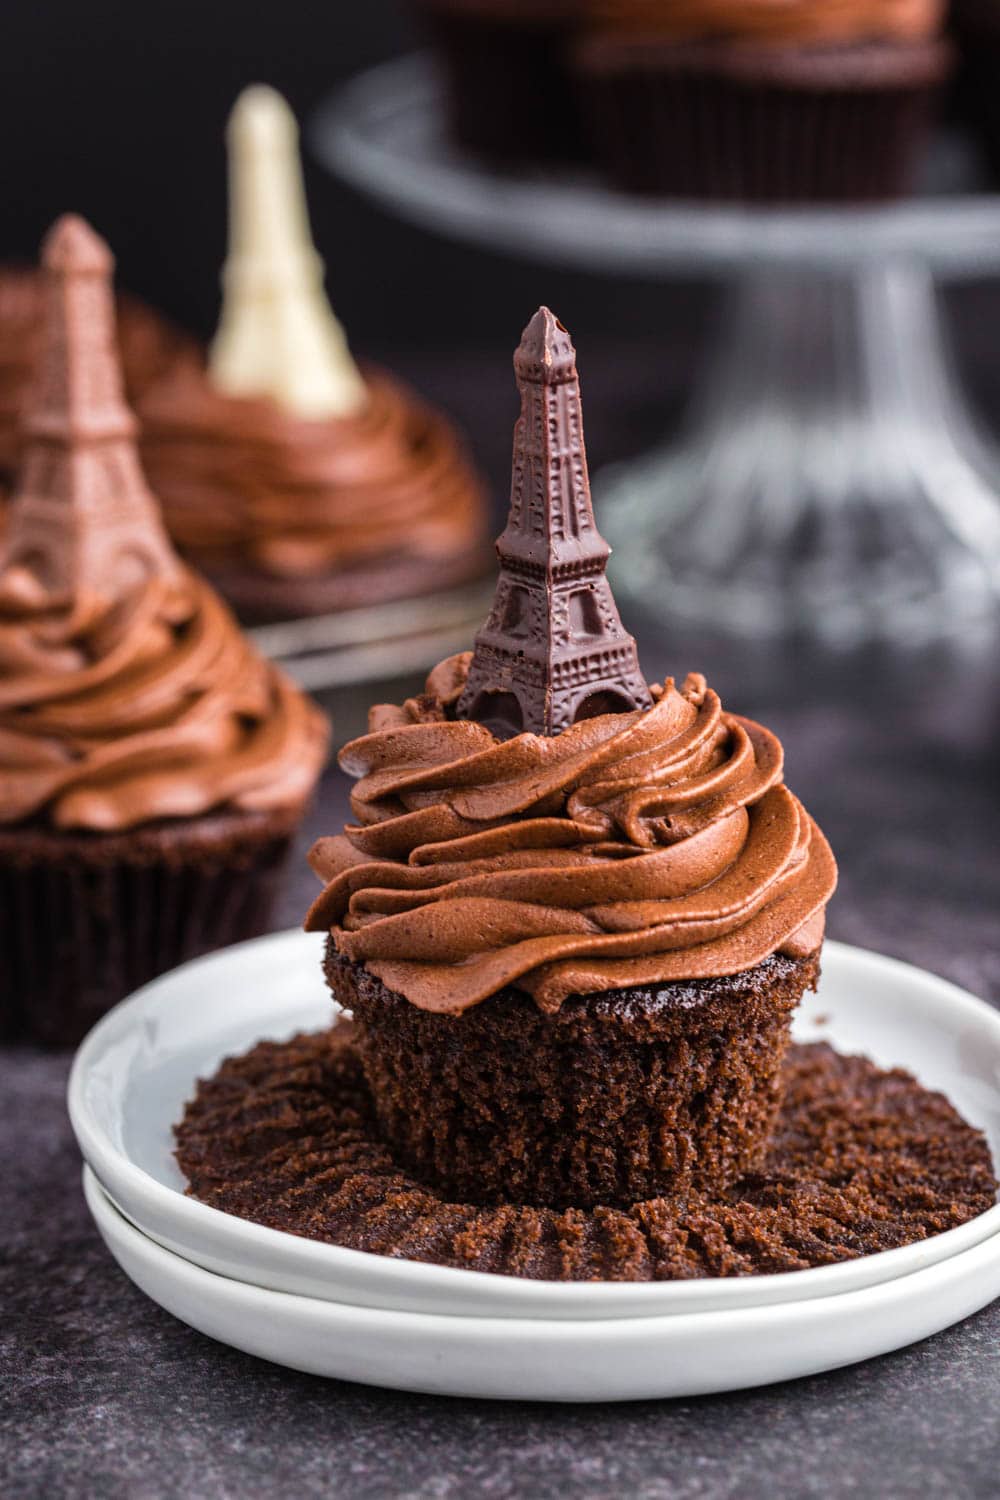 chocolate cupcake piled high with chocolate frosting and a dark chocolate molded Eiffel tower on top.